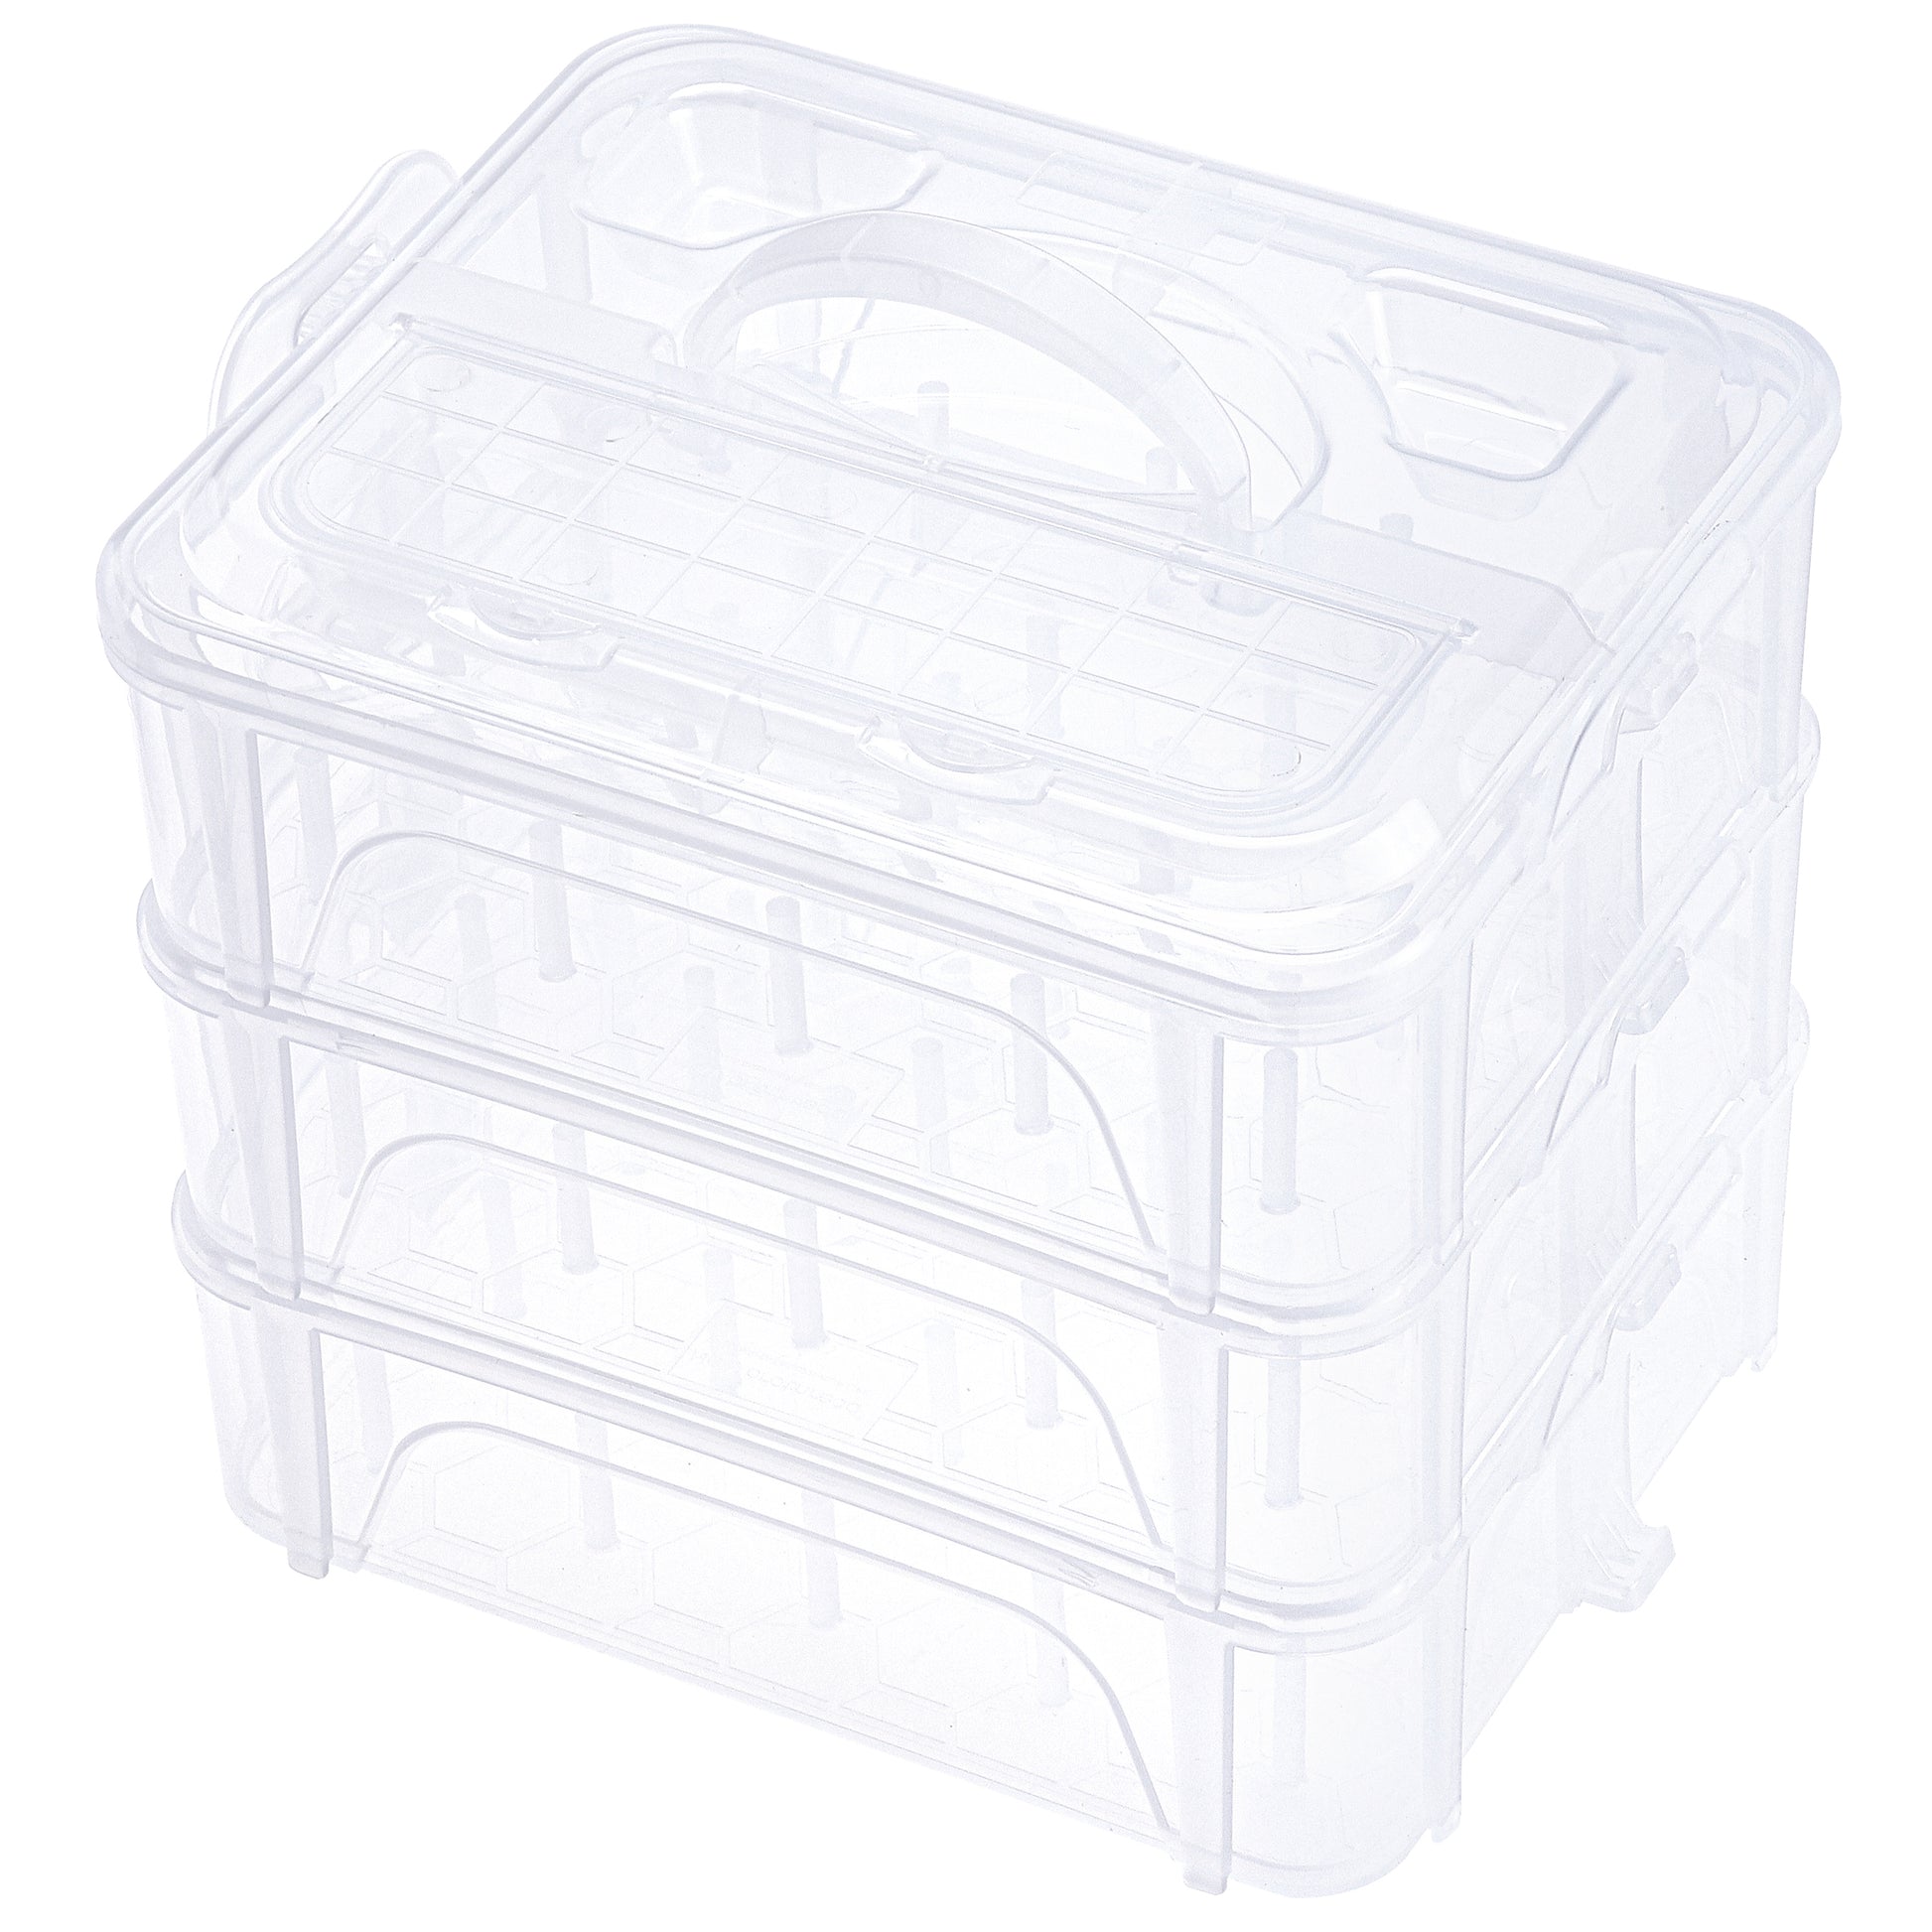 New brothread 3 Layers Stackable Clear Storage Box/Organizer for Holdi